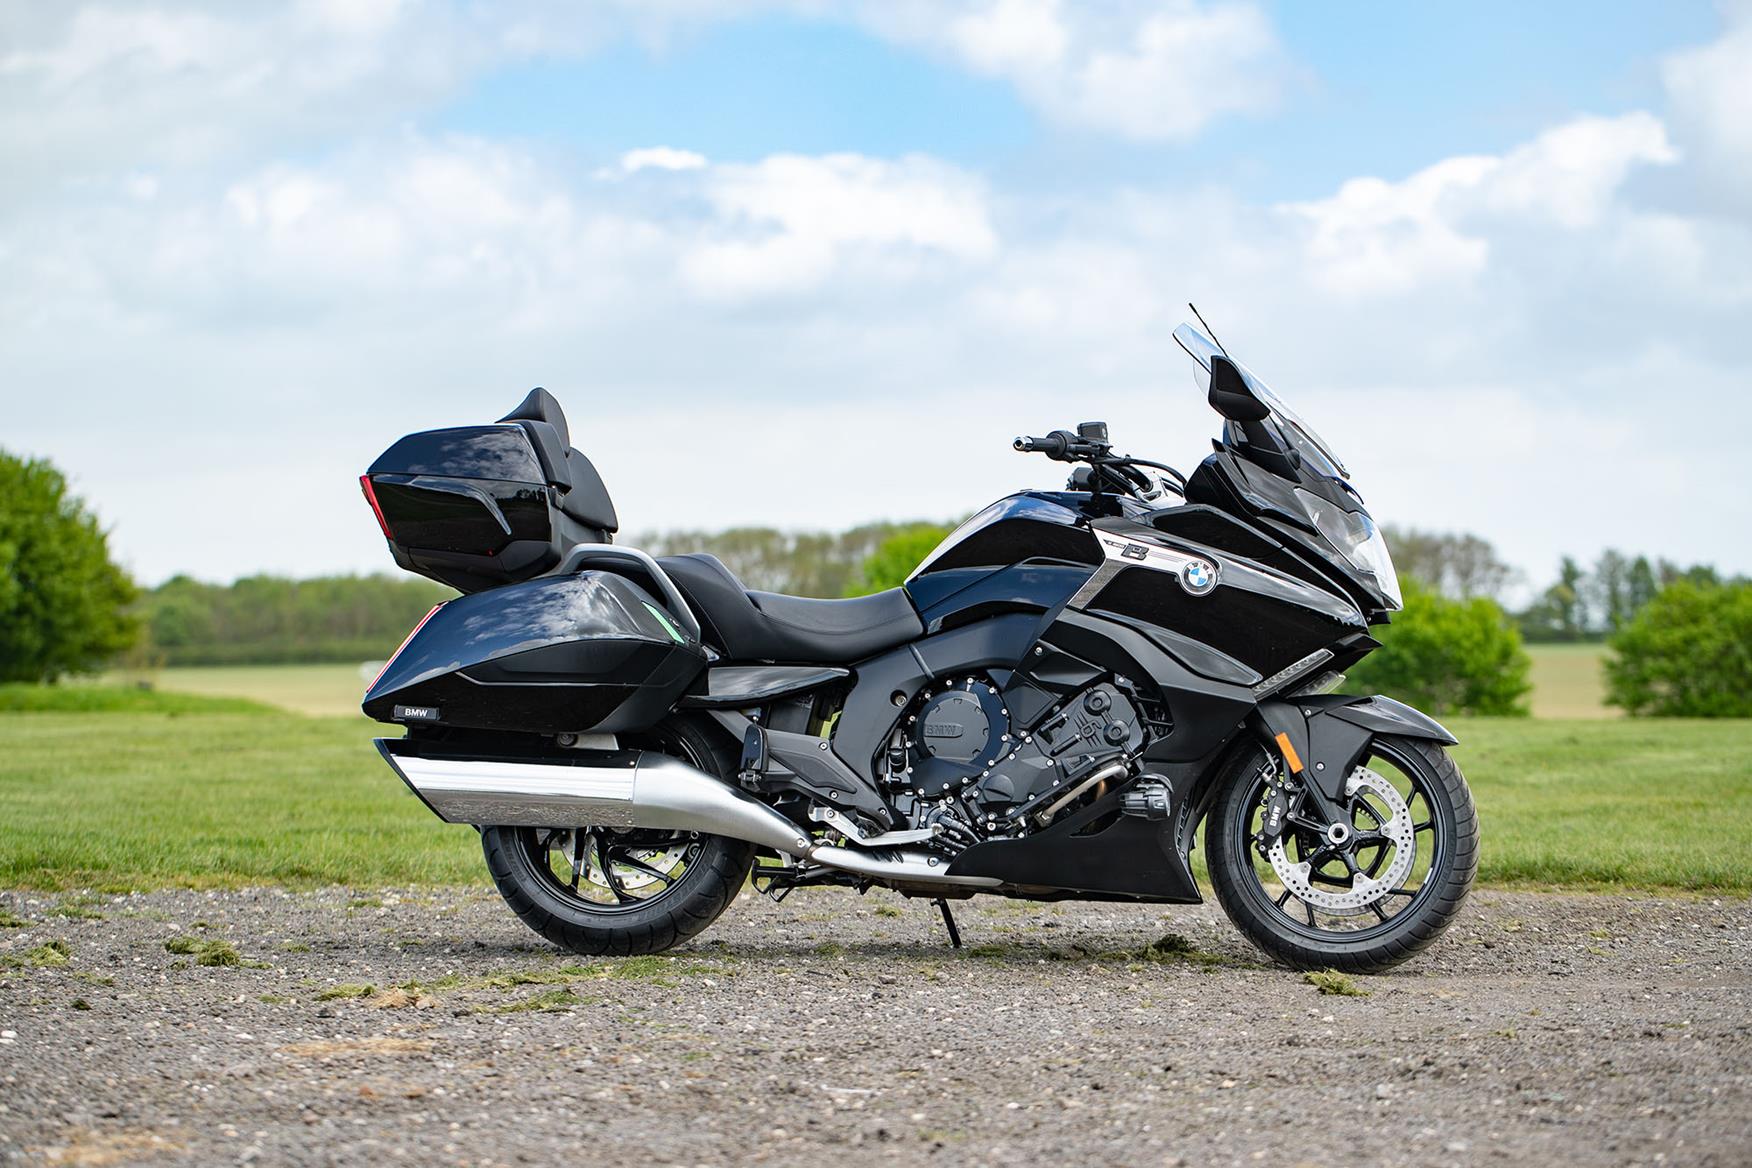 BMW K1600 GRAND AMERICA (2018-on) Motorcycle Review | MCN